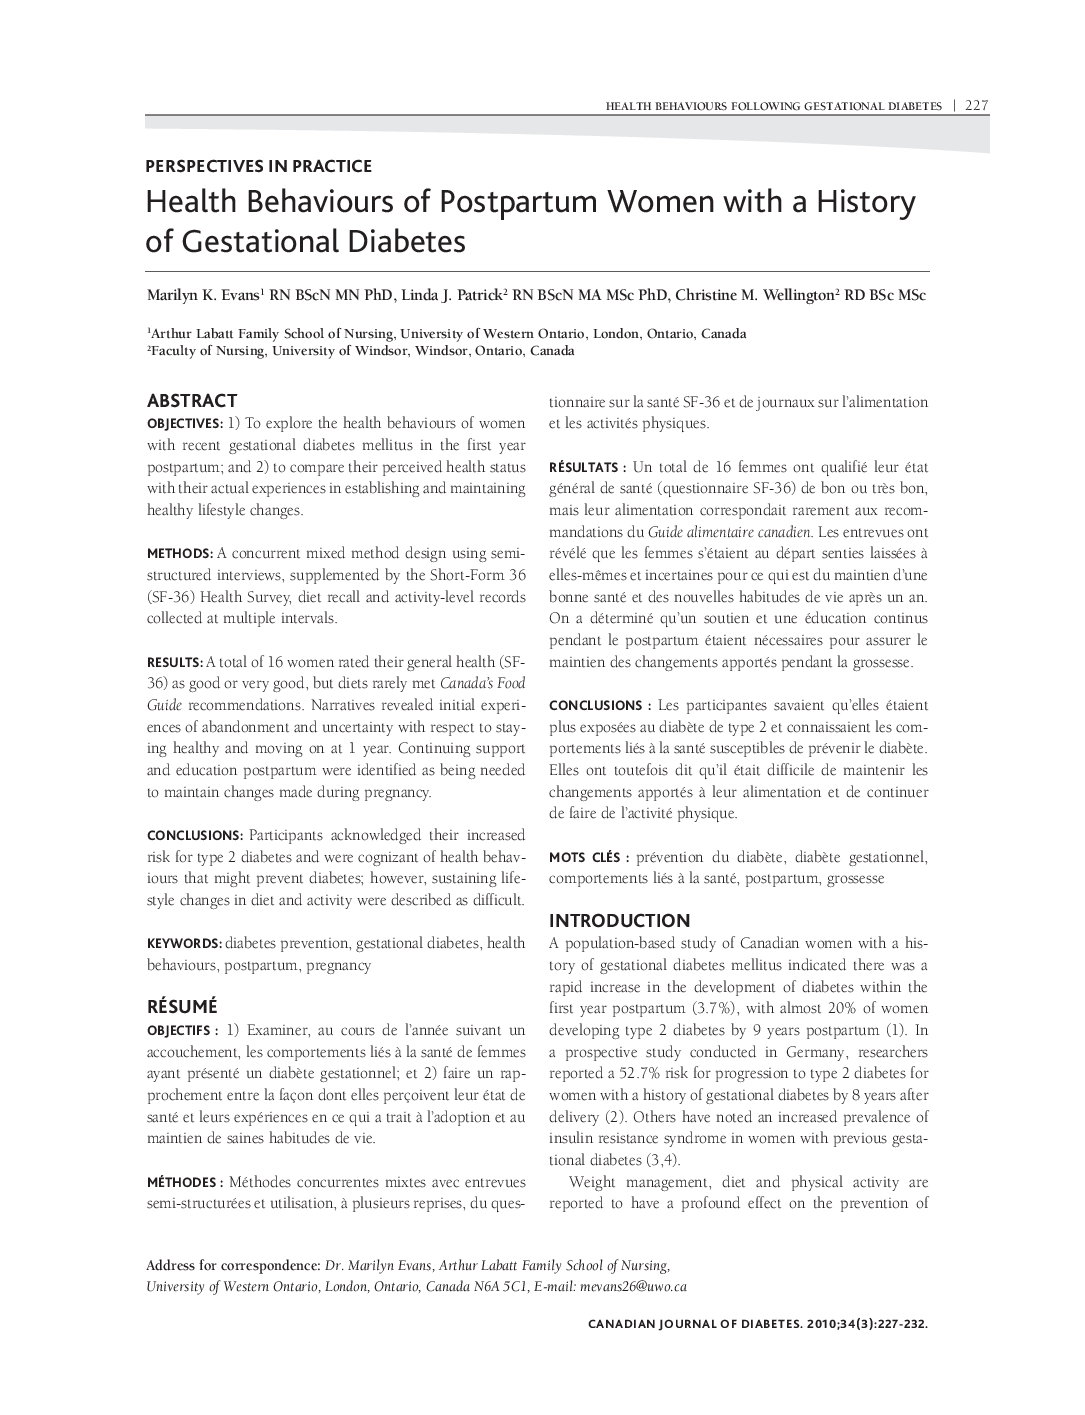 Health Behaviours of Postpartum Women with a History of Gestational Diabetes